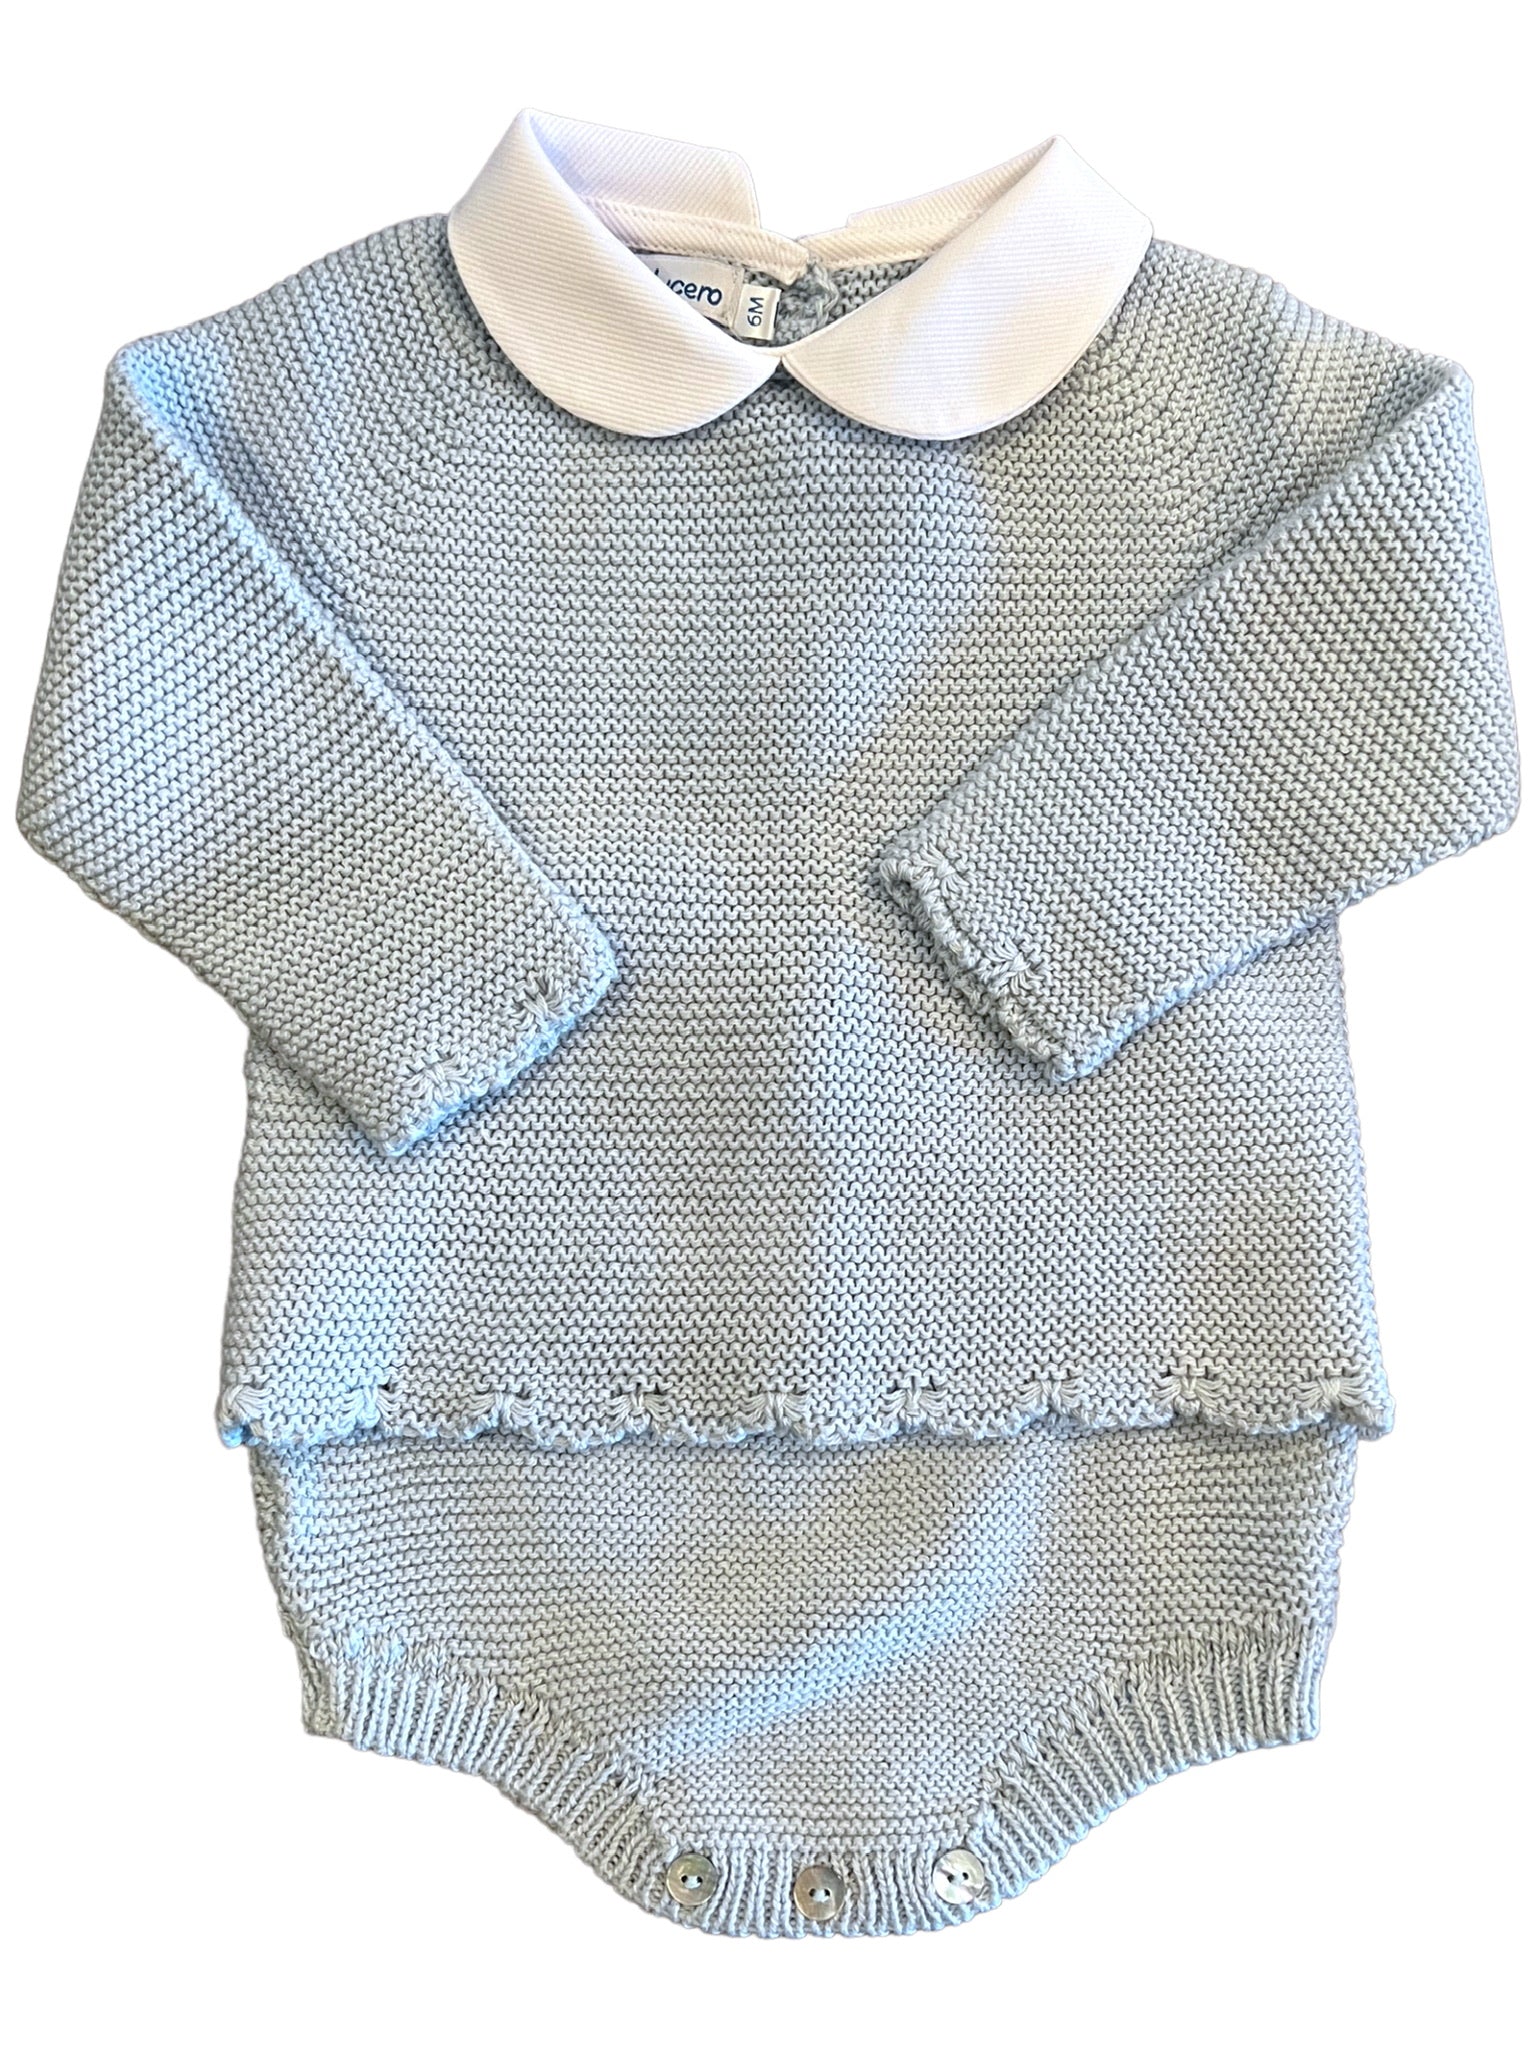 Light Blue Diaper Set with Collar (Baby)